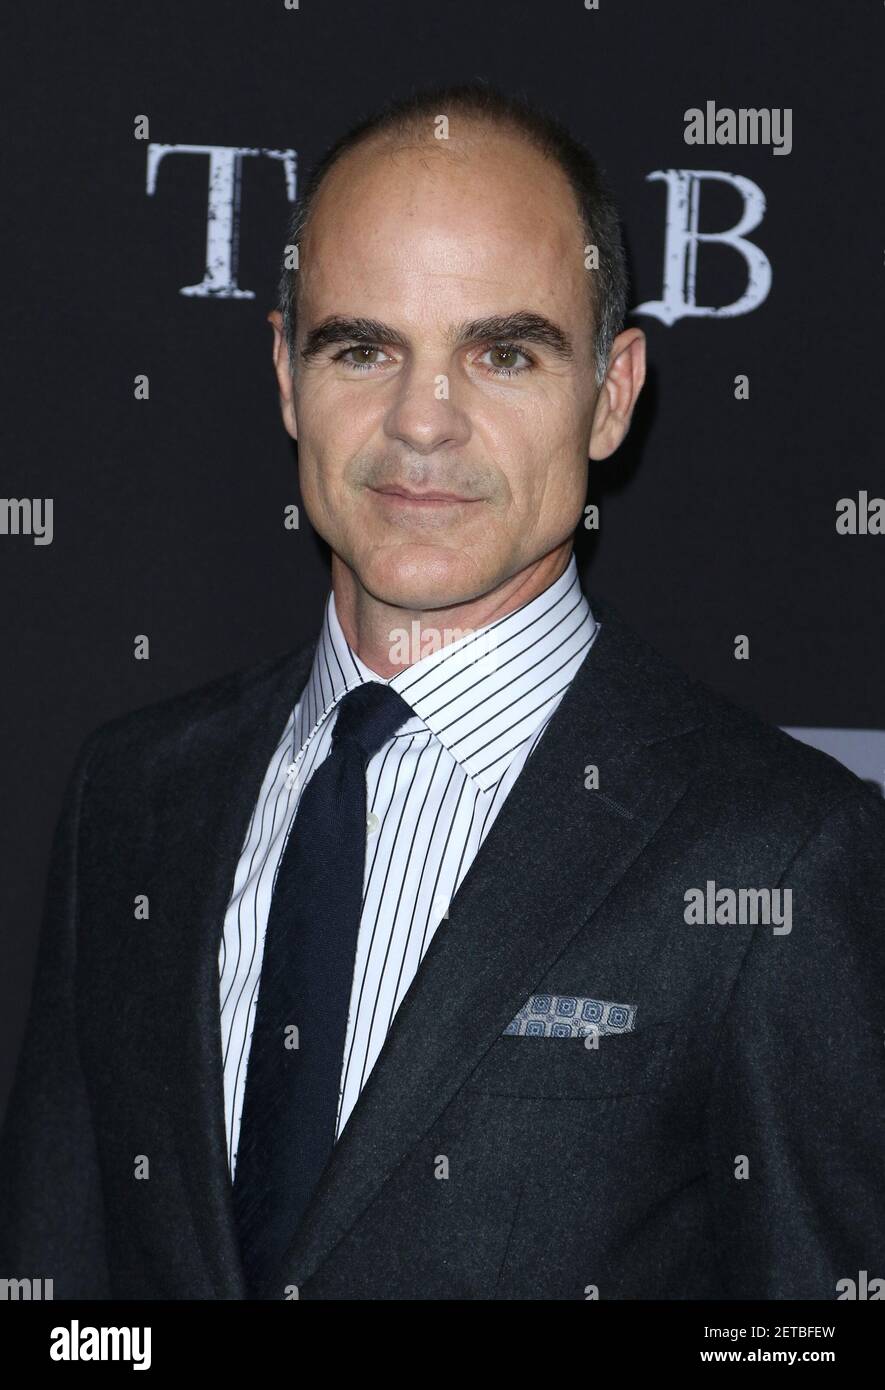 Michael Kelly At Fx S Taboo La Premiere Held At Dga Theater On January 09 17 In